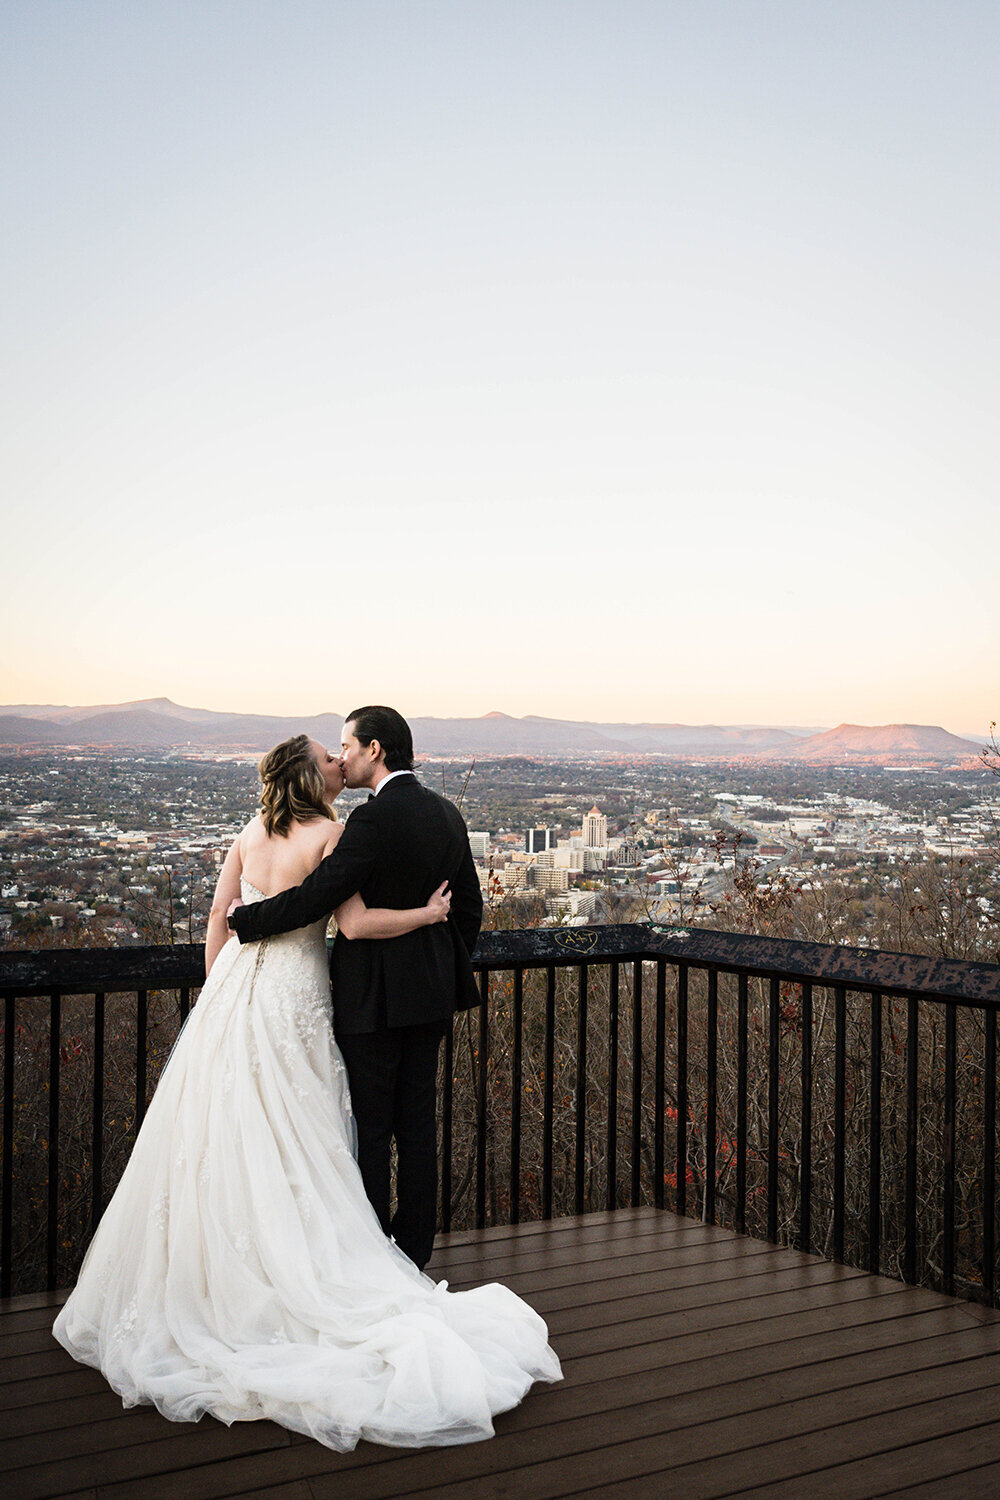 Two marriers on their elopement day face the cityscape of Downtown Roanoke and the Blue Ridge Mountains at sunset at the Rockledge Overlook in Virginia. The couple wraps their arms around the other’s back and goes in for a kiss.